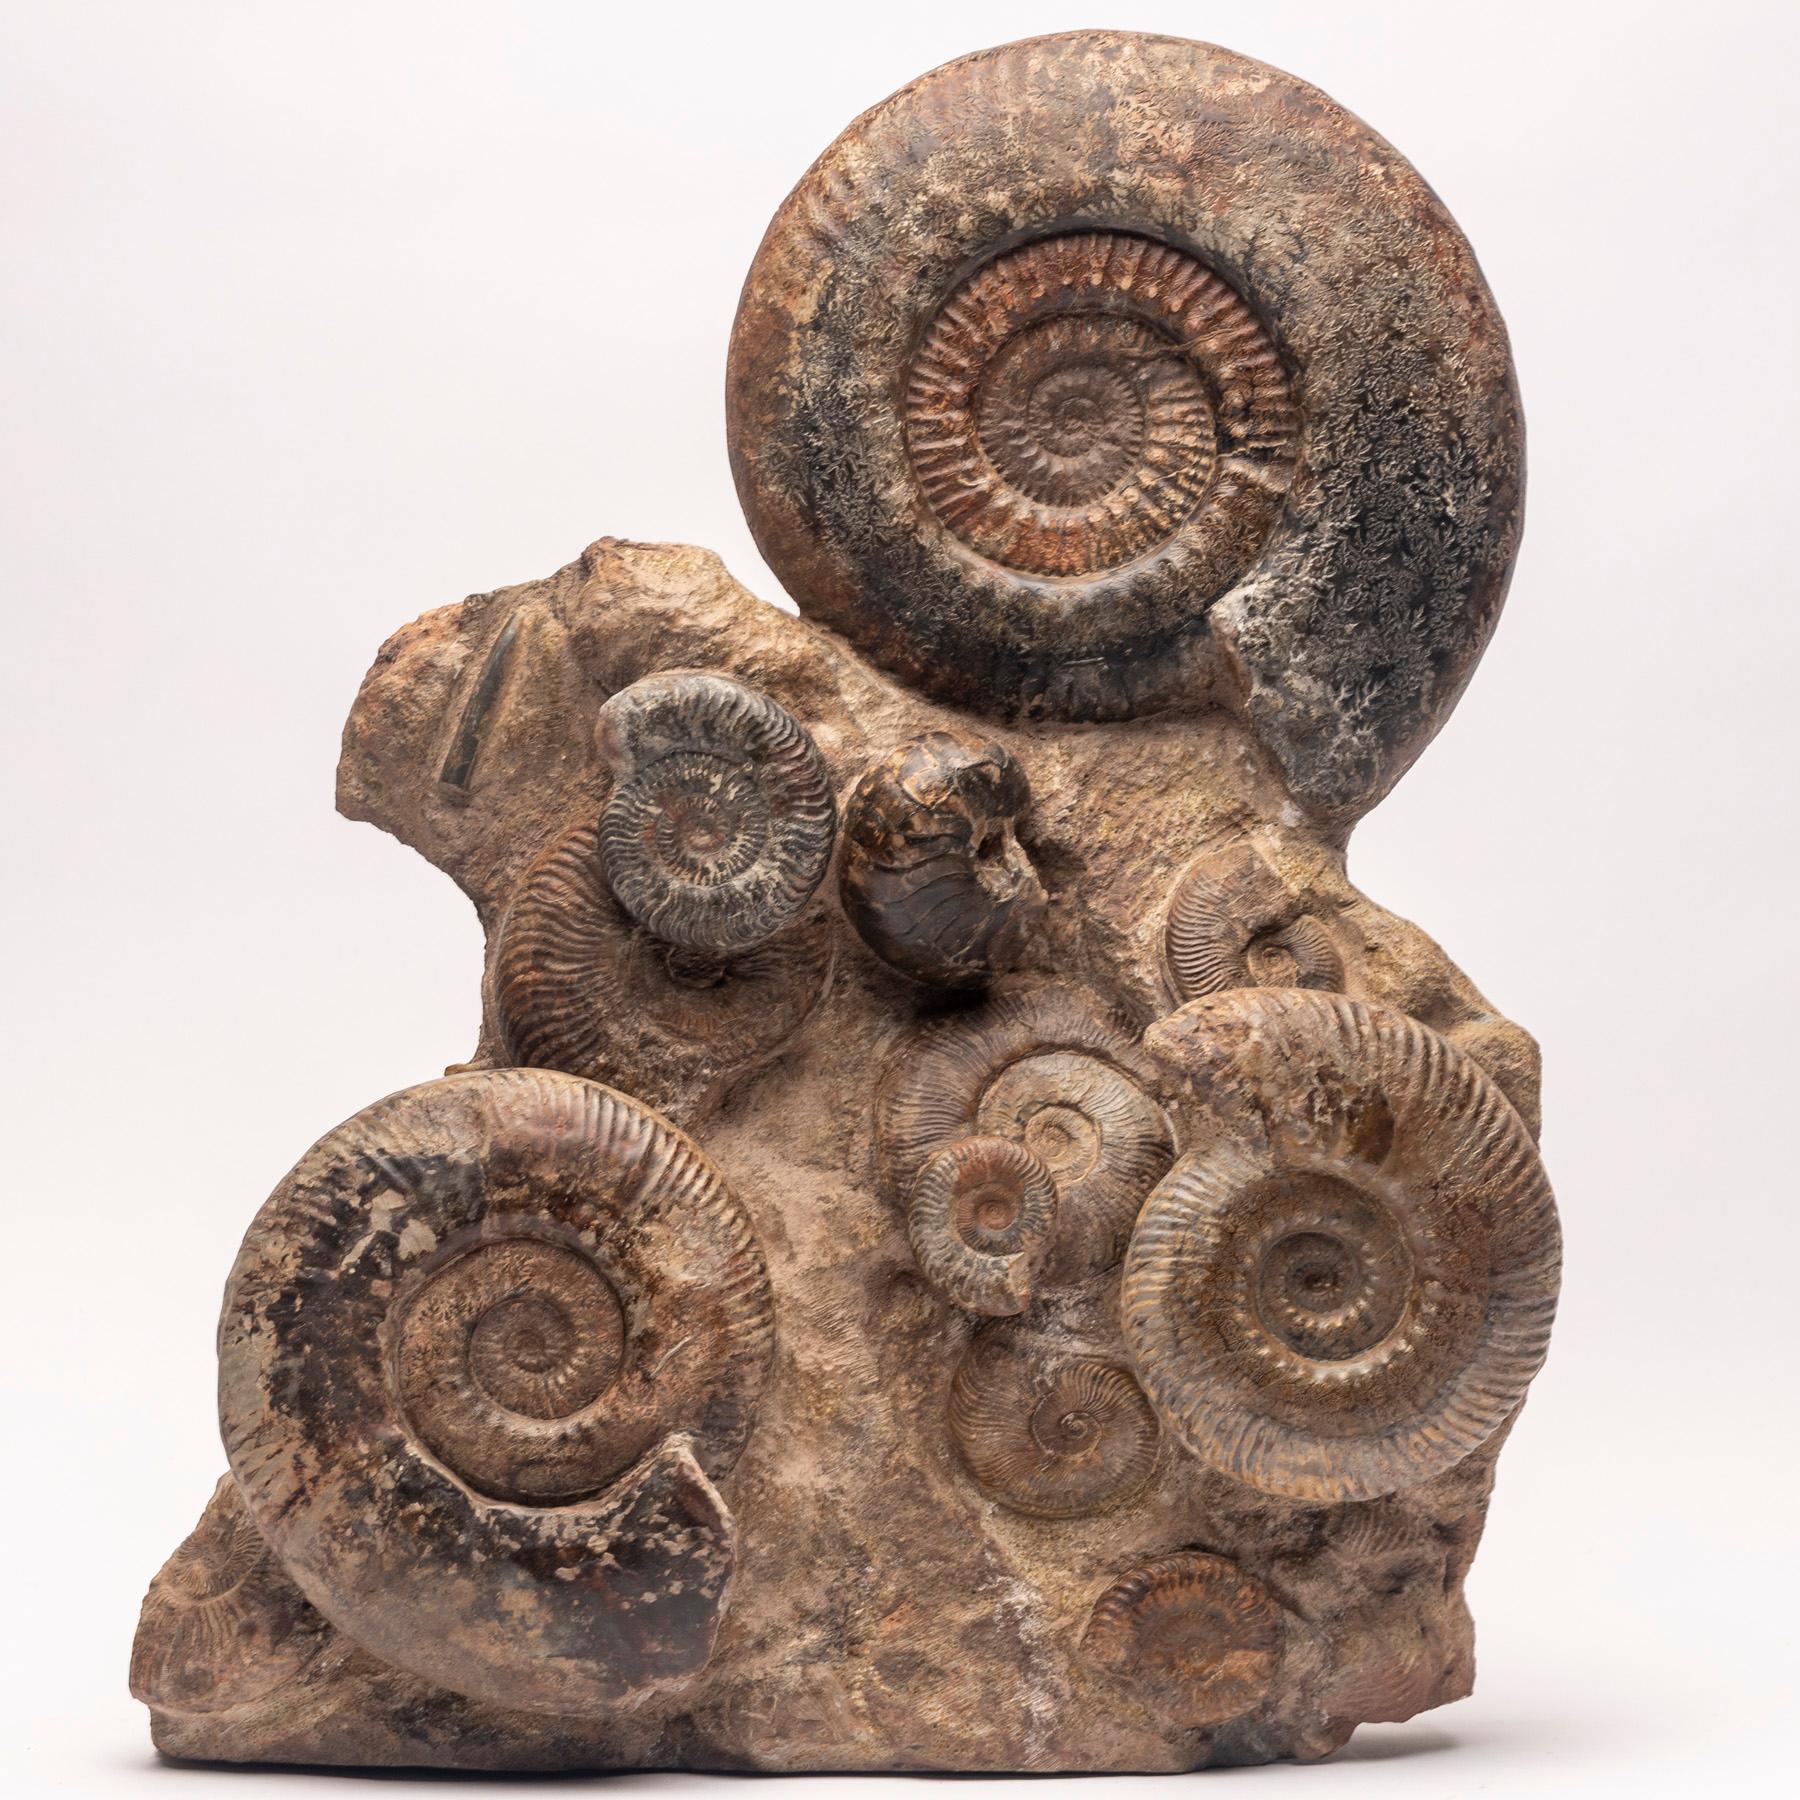 Organic Modern Free Standing Fossil Ammonite Cluster from Madagascar, Cretaceous Period